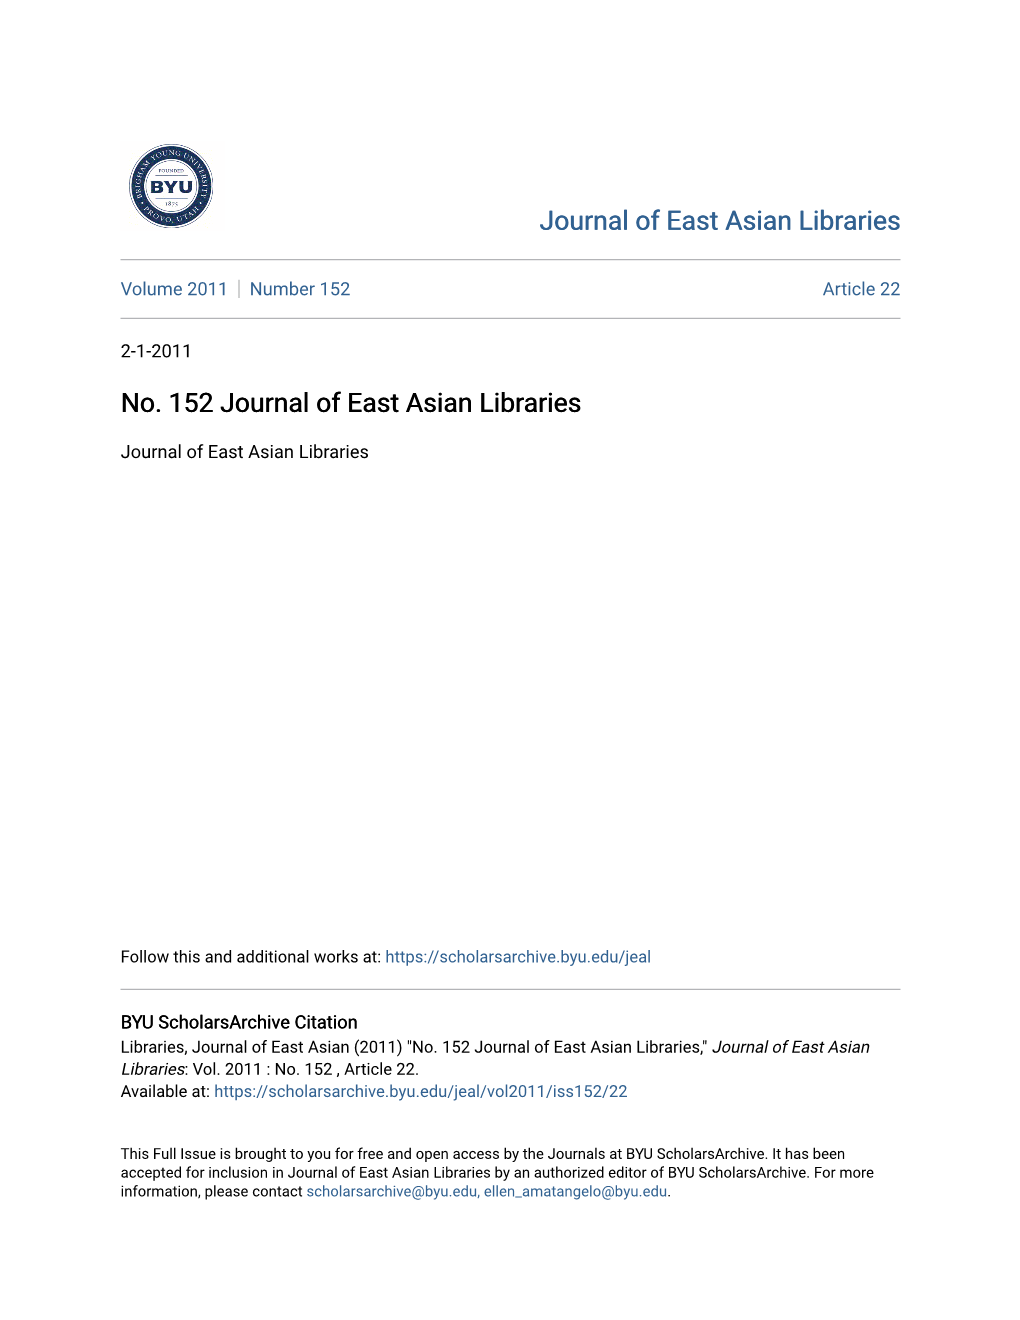 No. 152 Journal of East Asian Libraries